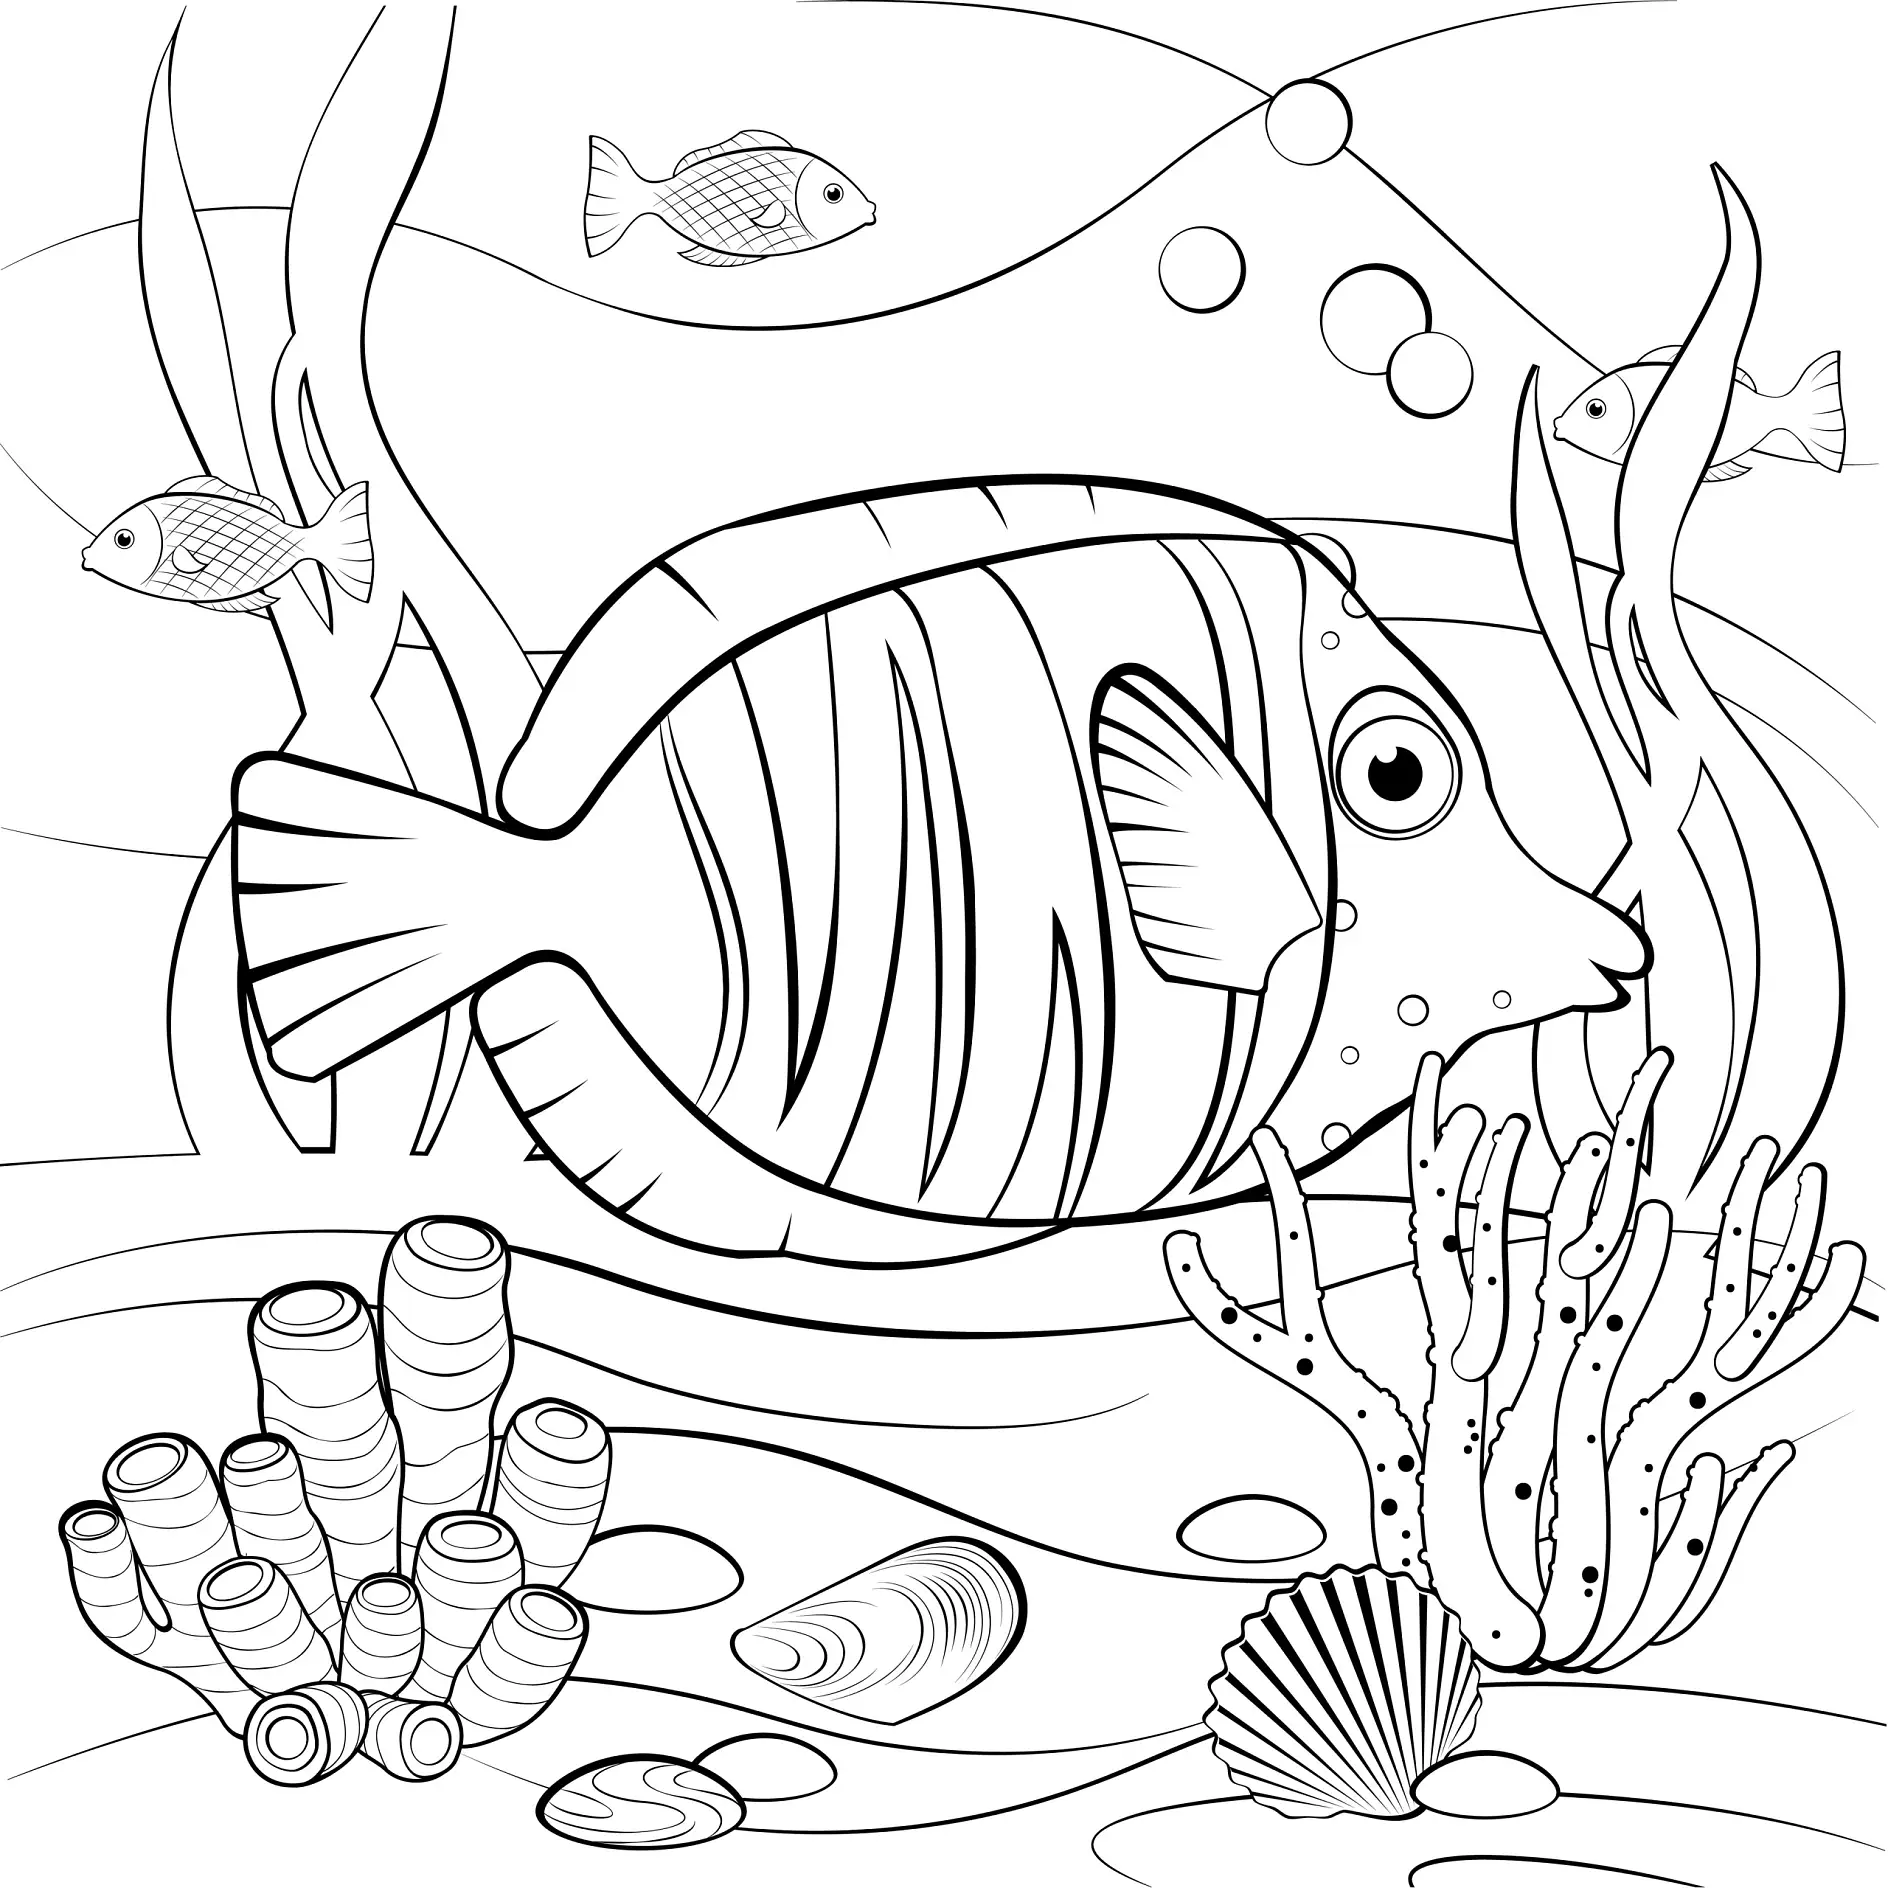 Underwater scene with cute tropical fish and coral reef. Printable coloring page for kids. Black and white vector illustration